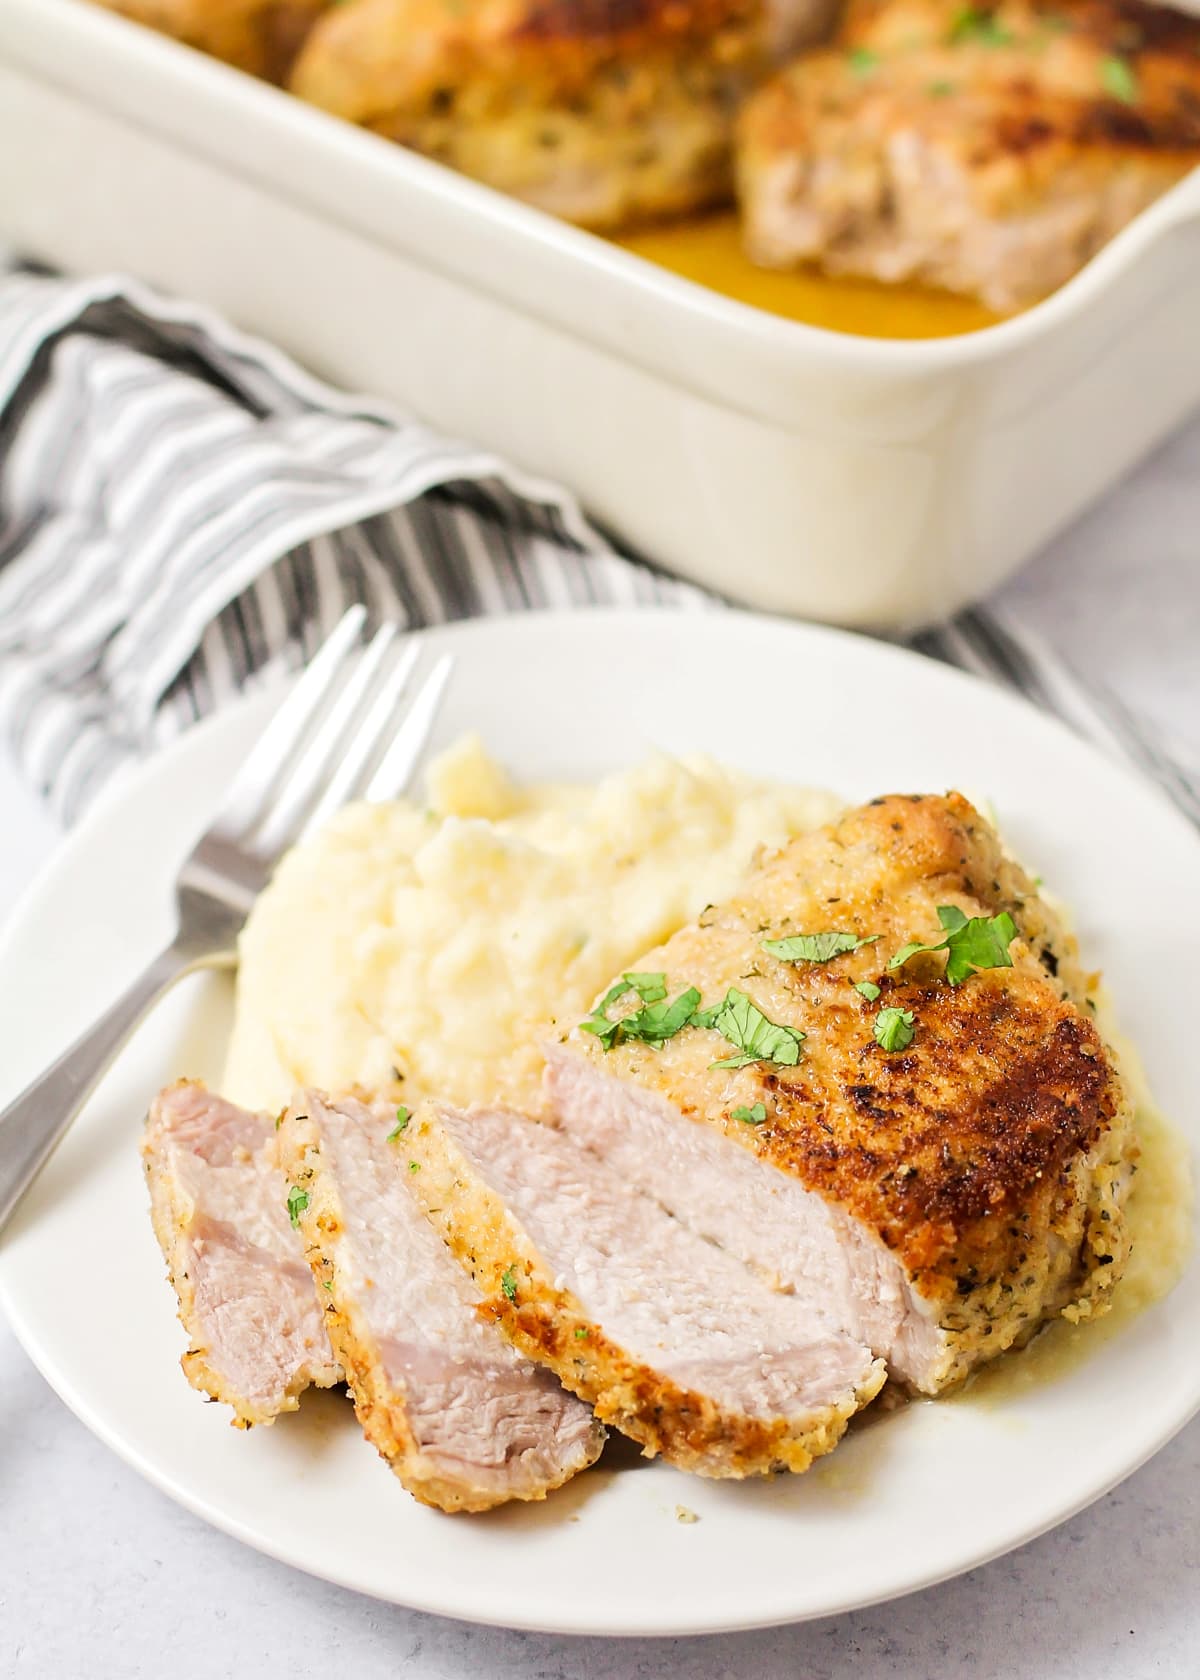 Breaded pork chops partially sliced and served with mashed potatoes.